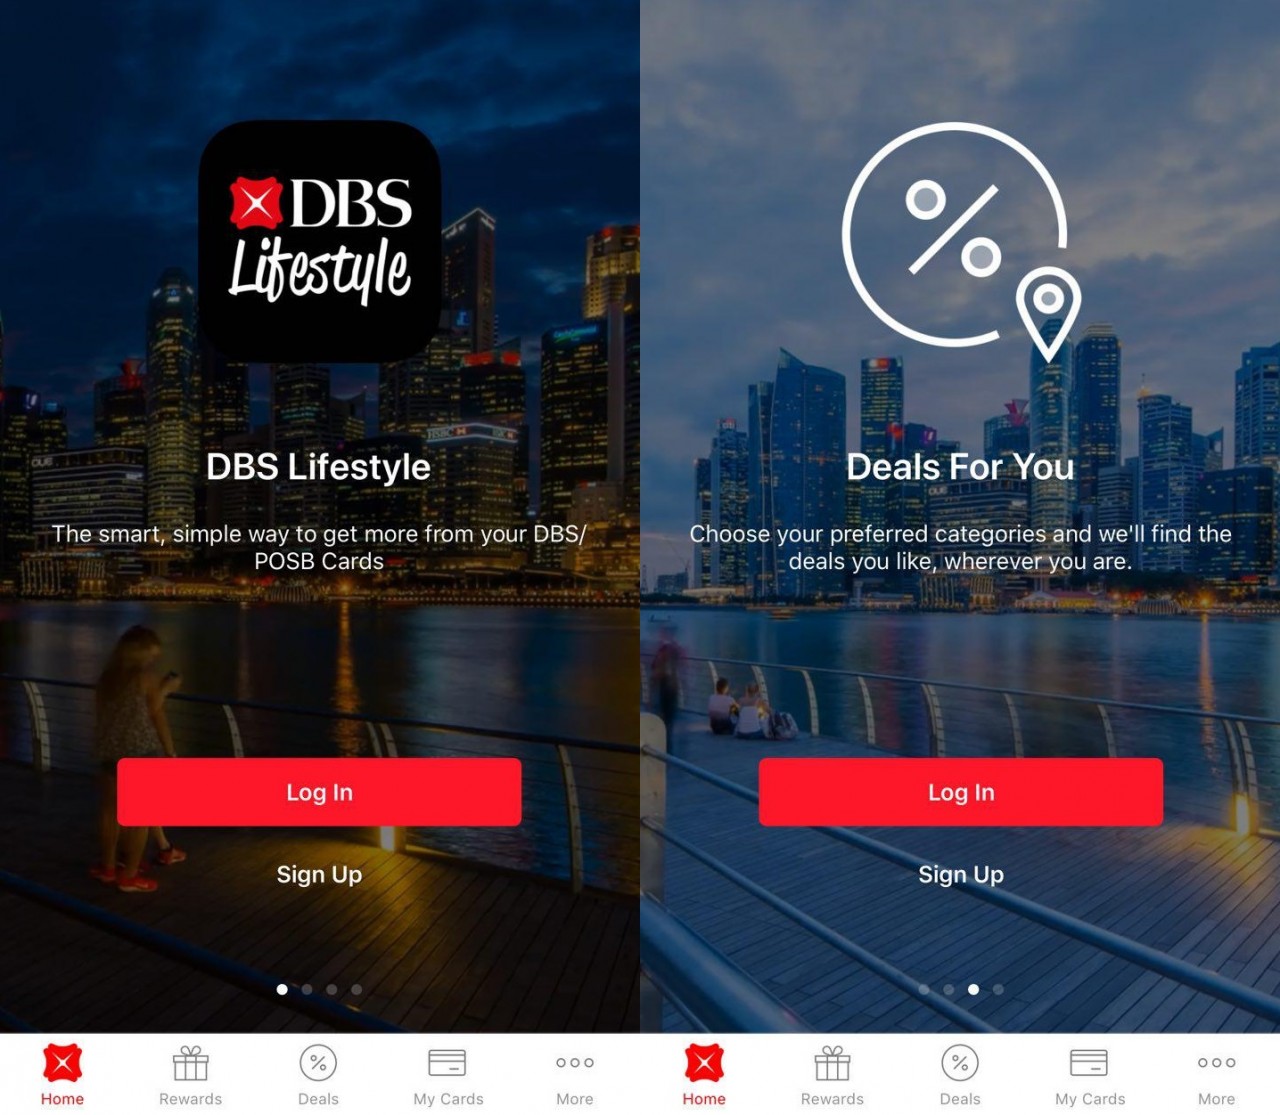 DBS Lifestyle App - dining discounts and promos